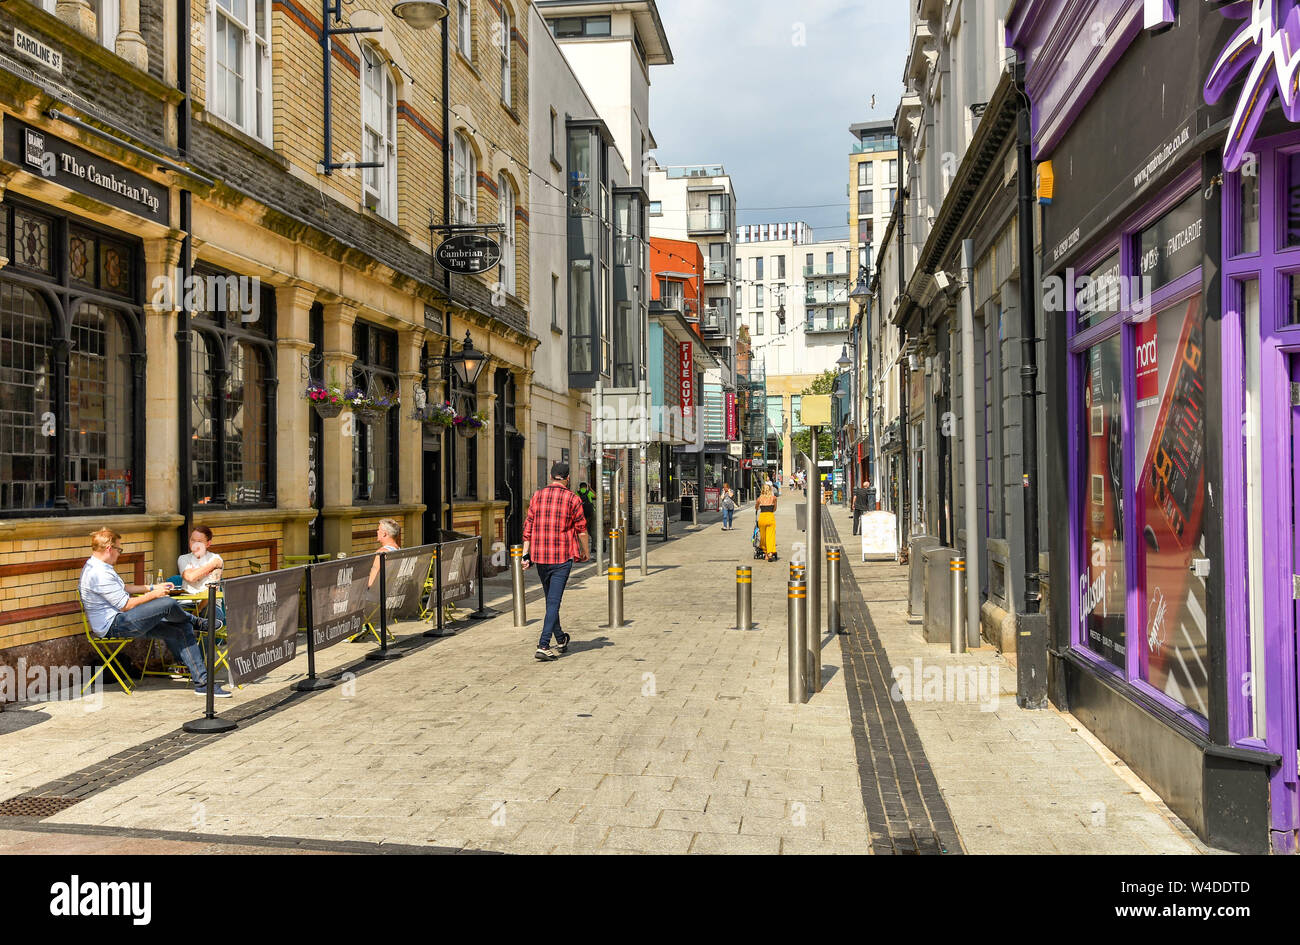 CARDIFF, WALES - JULY 2019: Caroline Street in Cardiff city centre. It is popular with people seeking curry and chips after a night out. Stock Photo